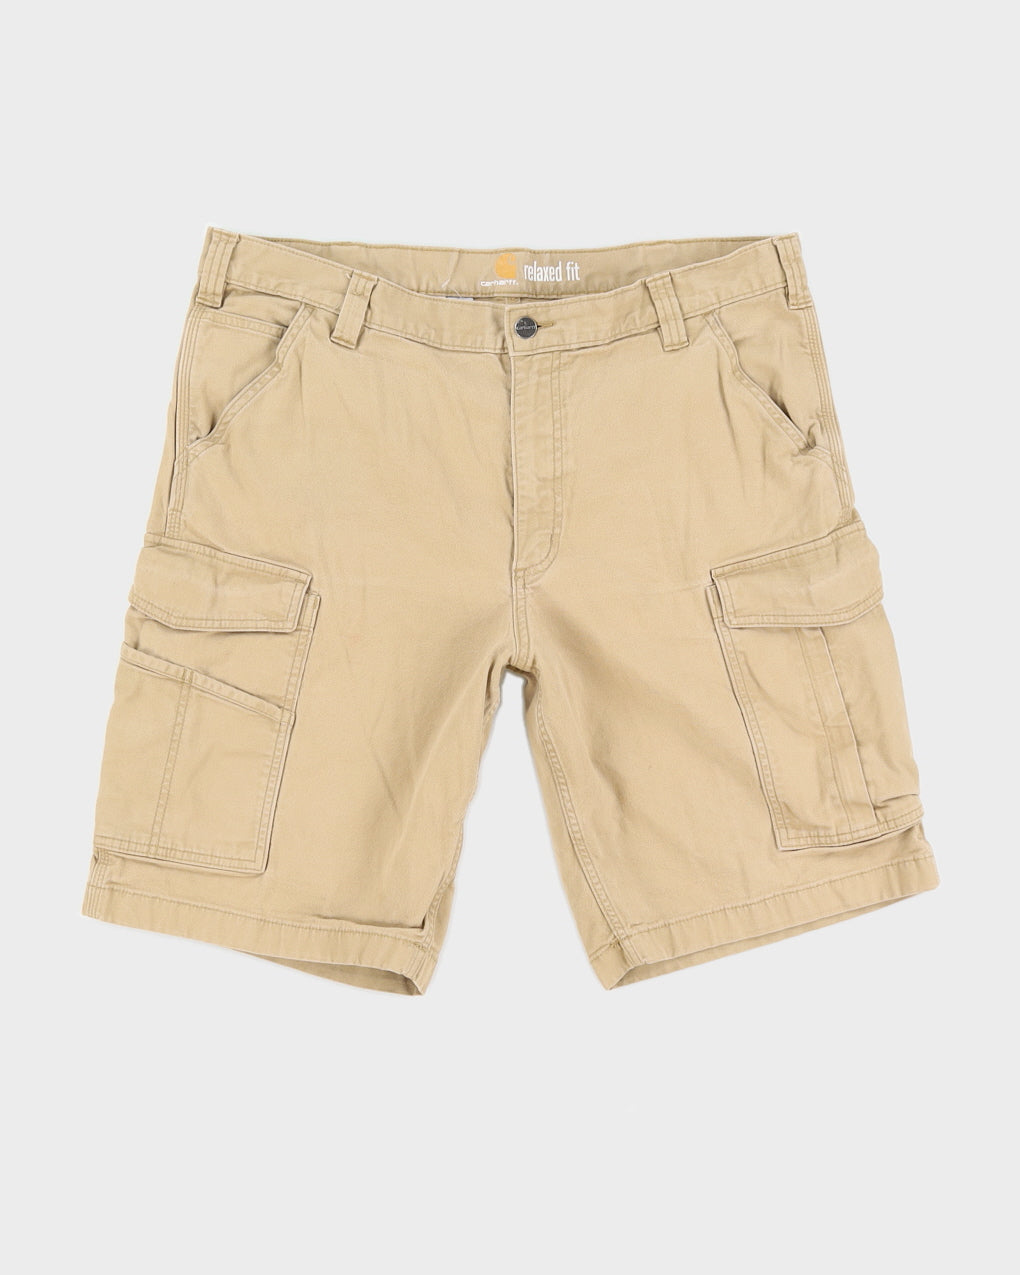 Carhartt Beige Relaxed Fit Cargo Shorts - W38